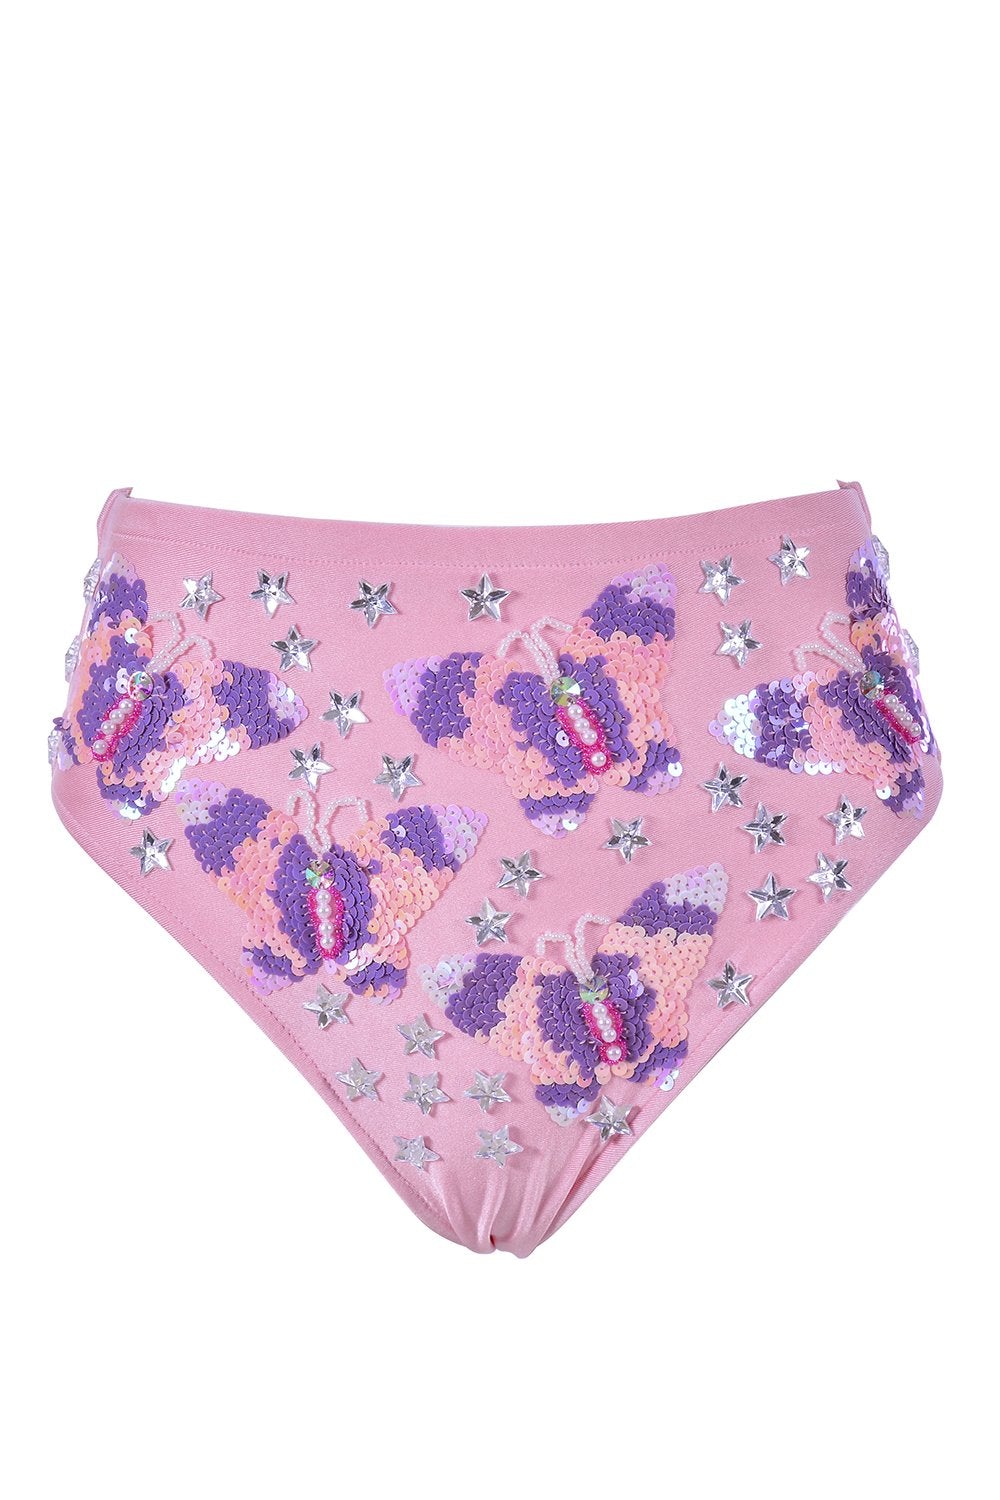 Hand Stitched Sequin Set- Pink Butterfly Dream